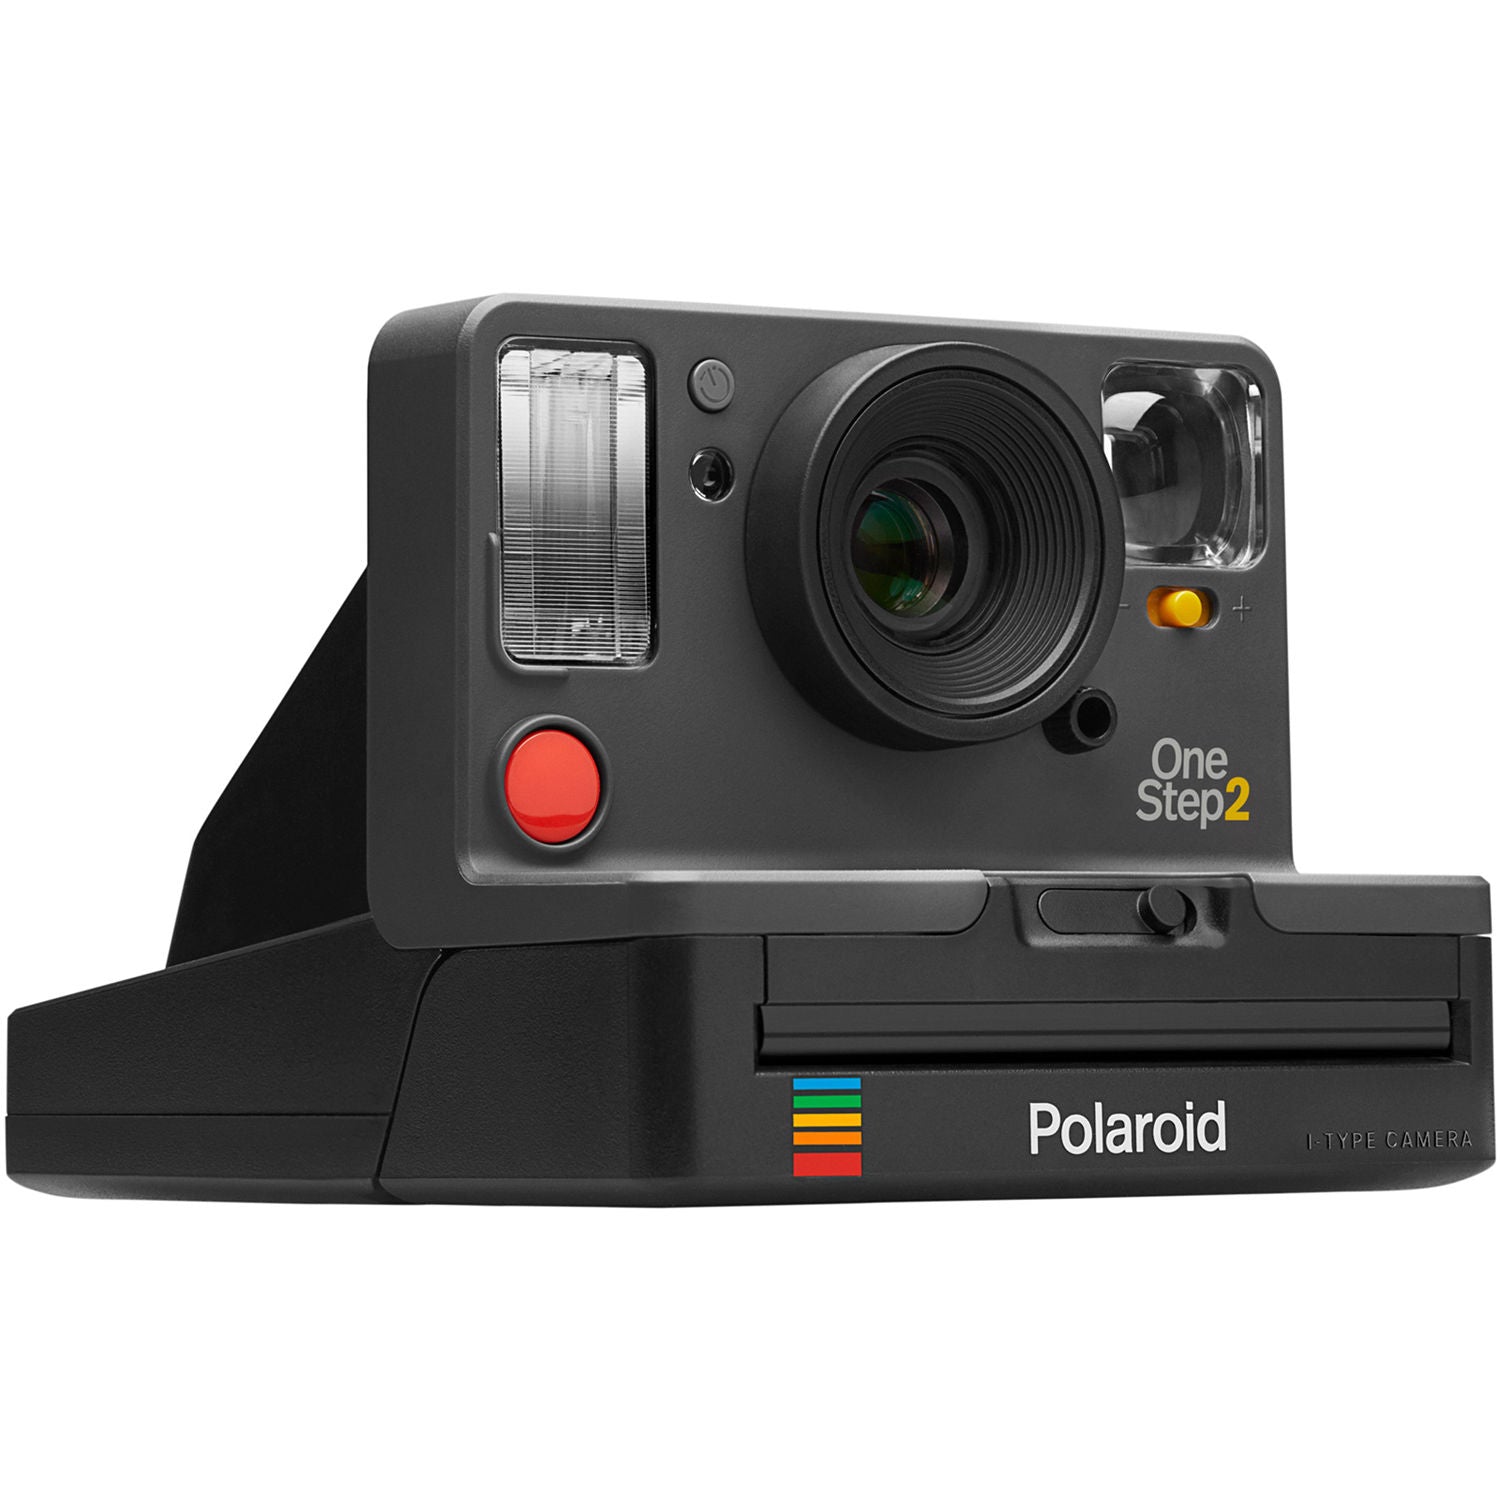 Buy Polaroid Cameras & Film in NYC at in Brooklyn – Buy in NYC or online at The Imaging in Brooklyn